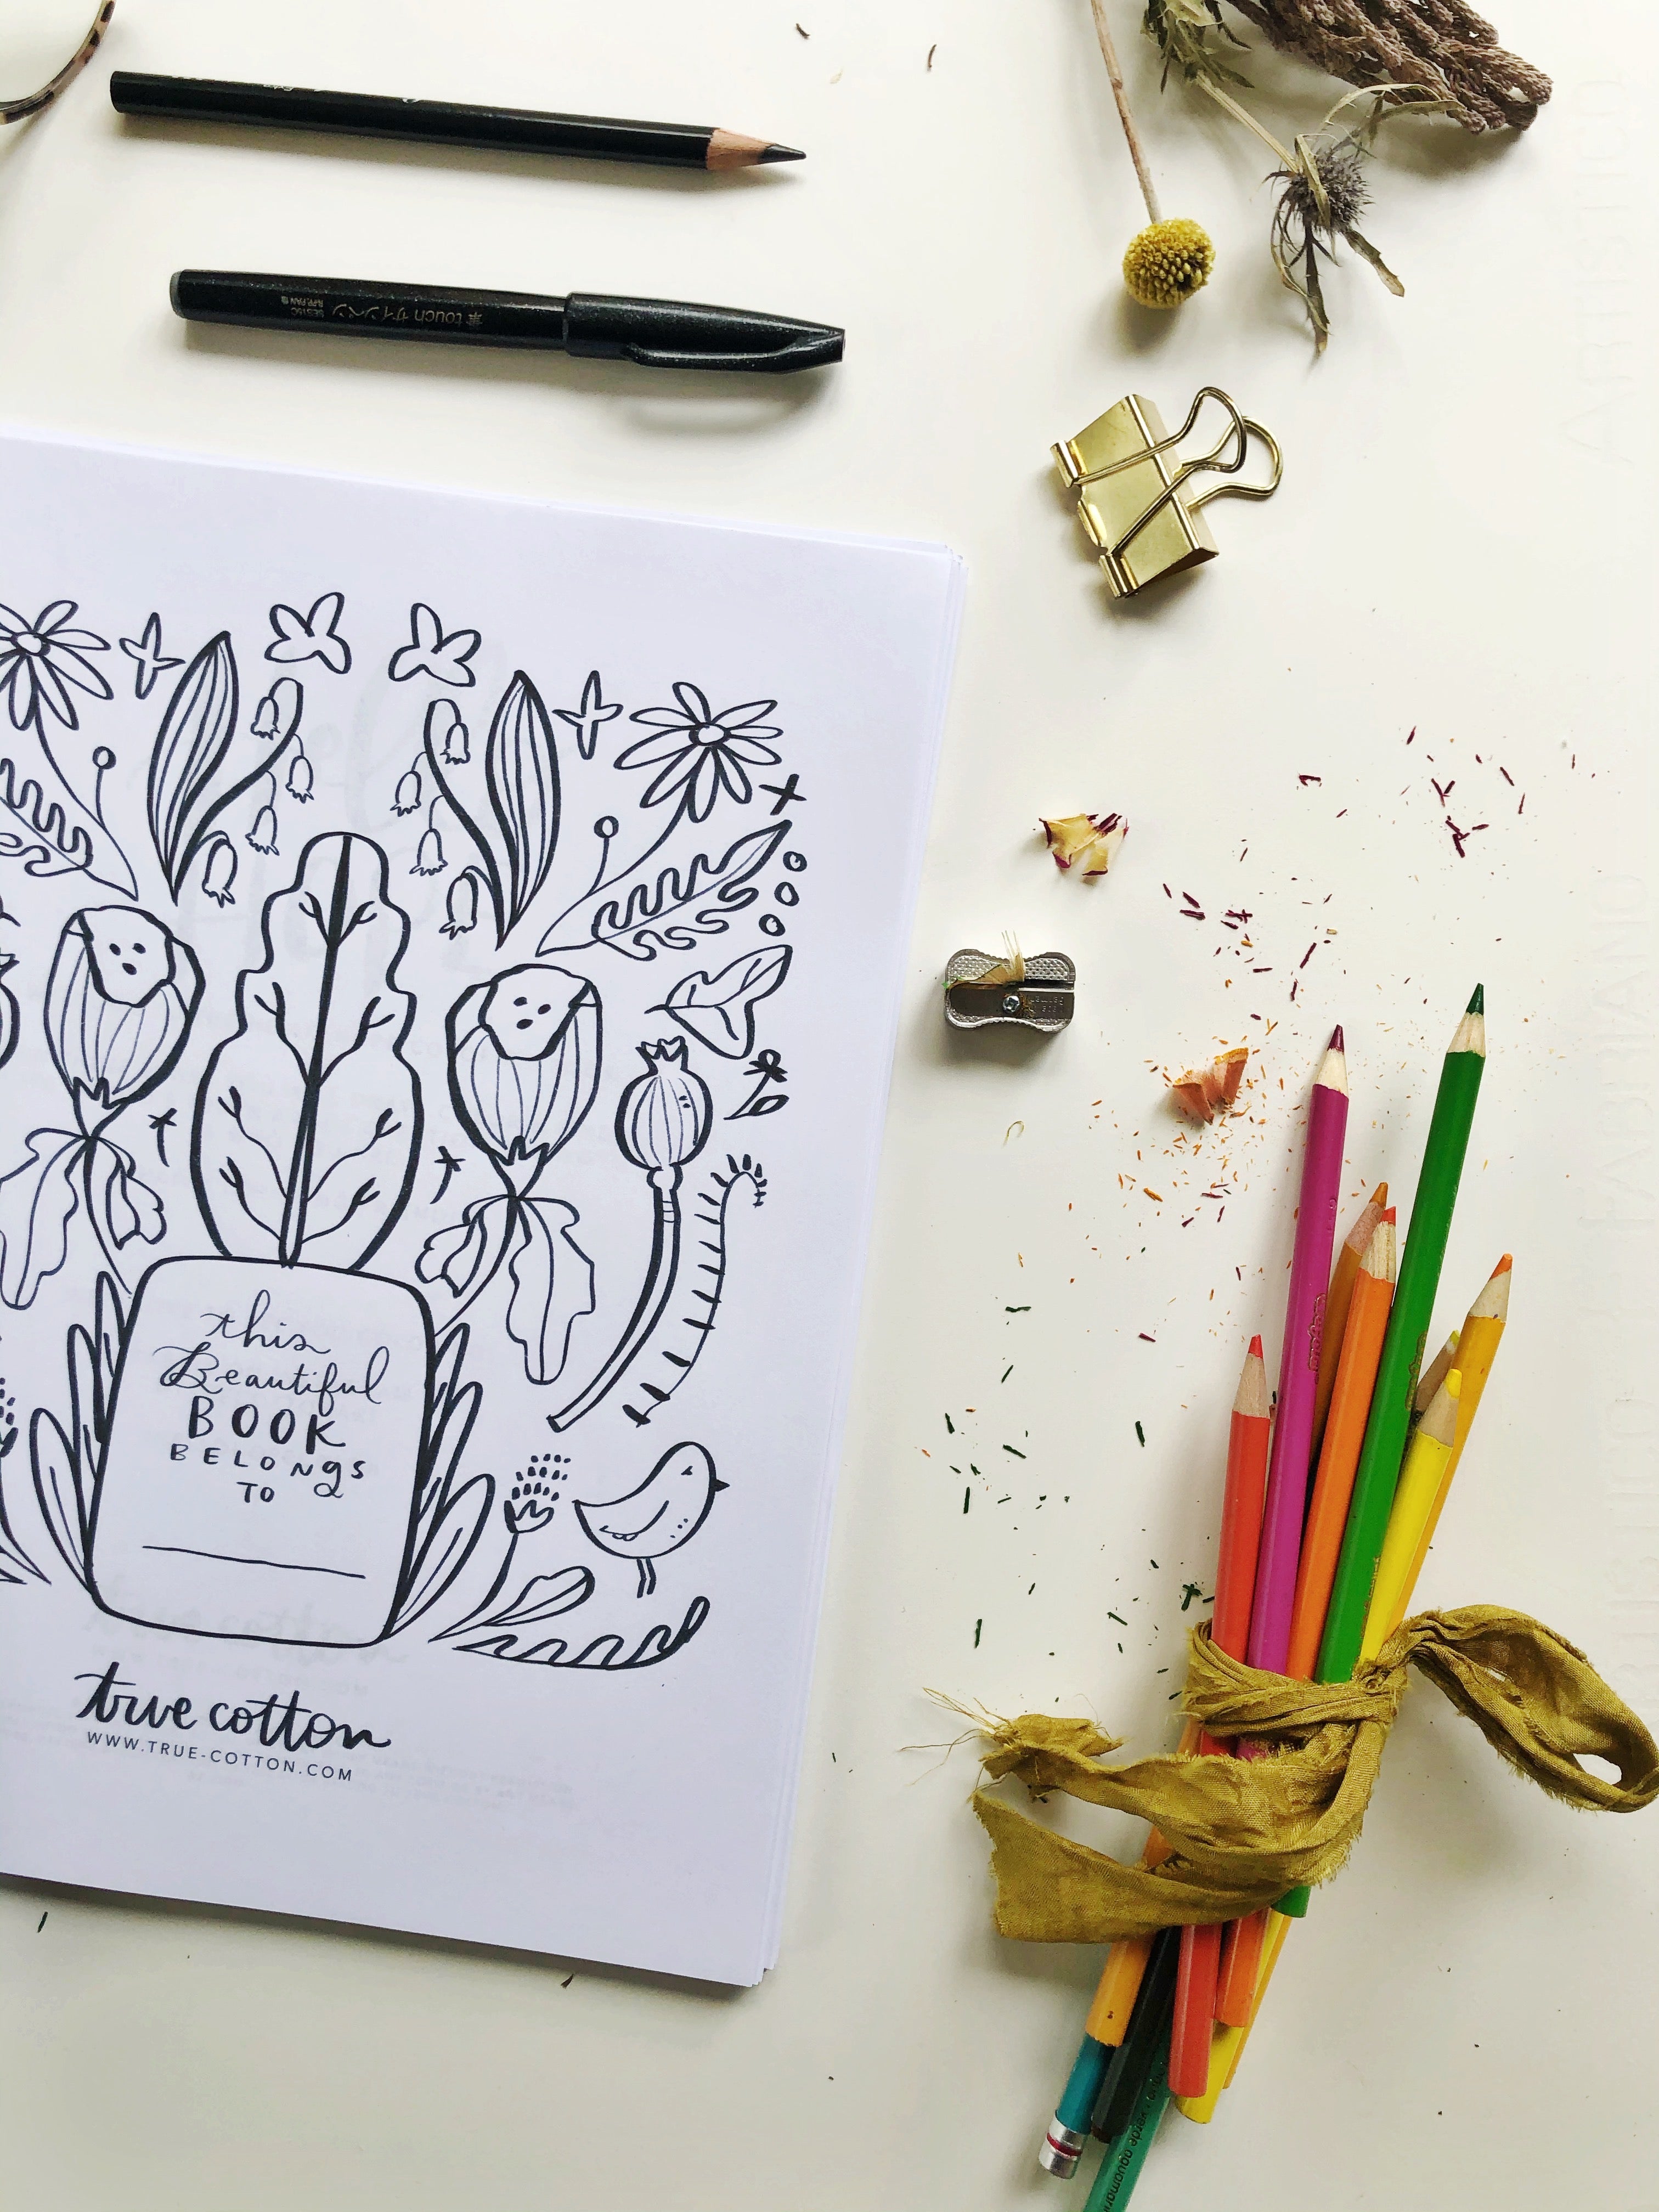 Digital Download // Hello Hope Coloring Pages // VOL. 4 // Write It Out